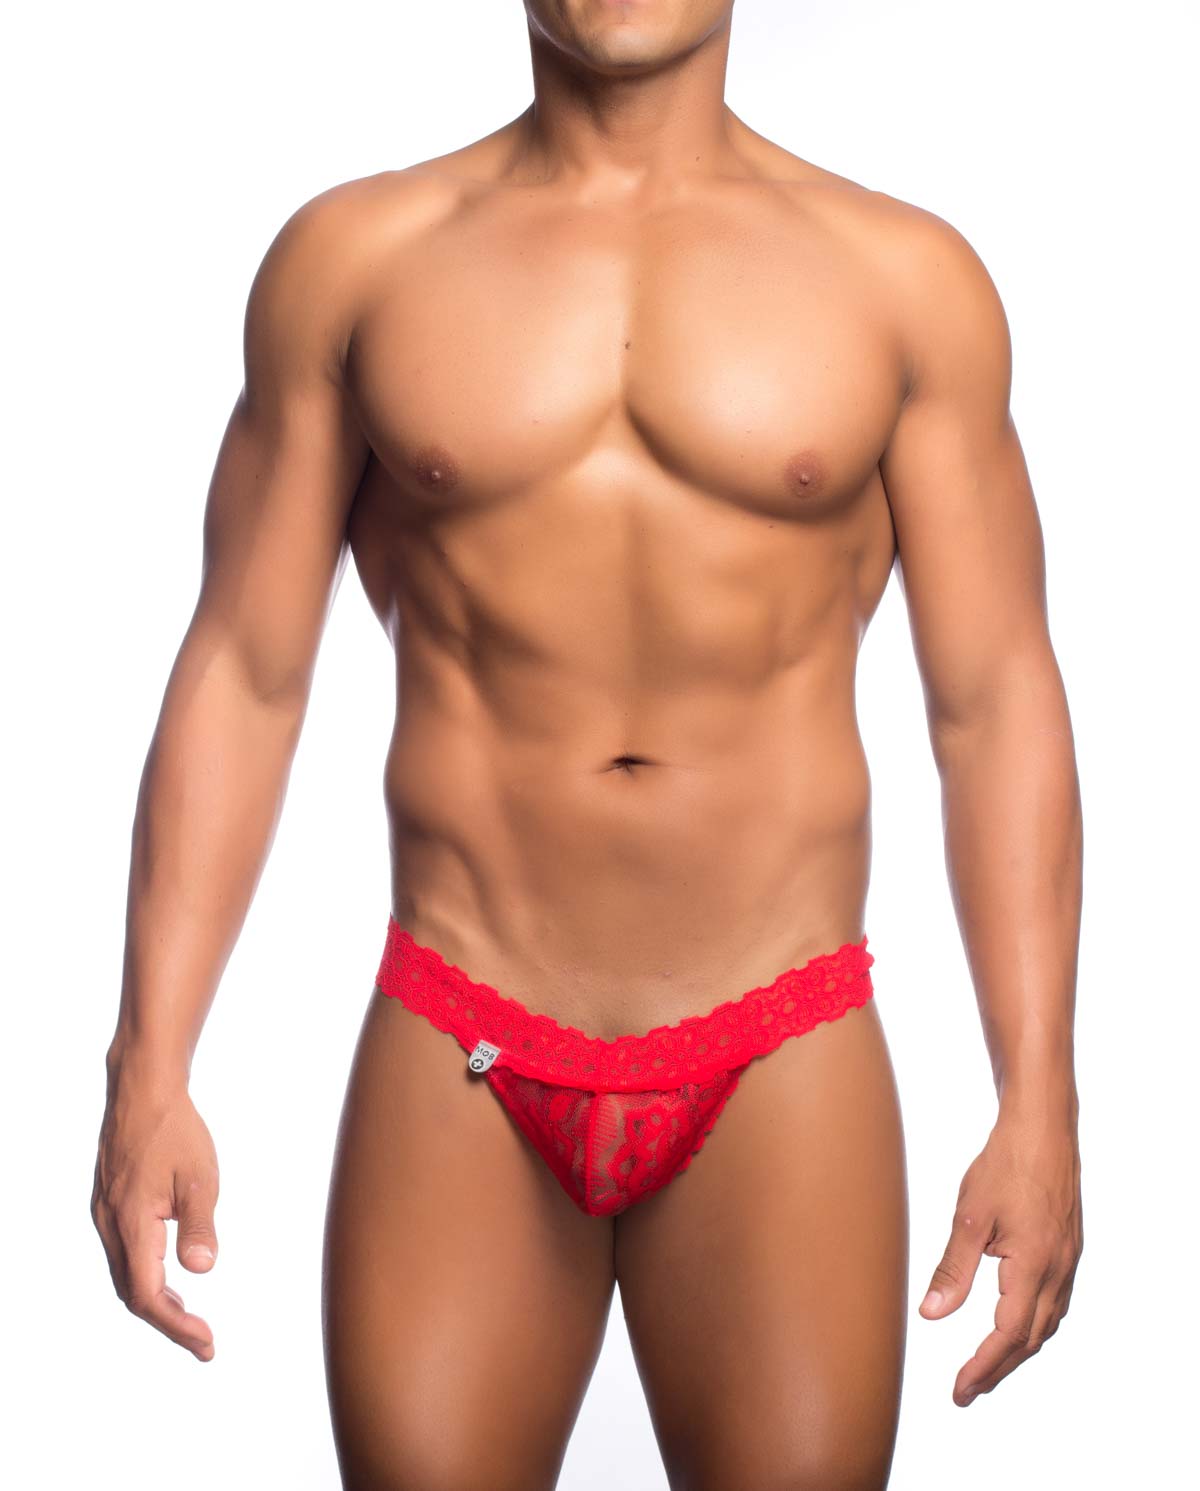 MOB Men's Lace Waist Thong available at www.MensUnderwear.io - 1